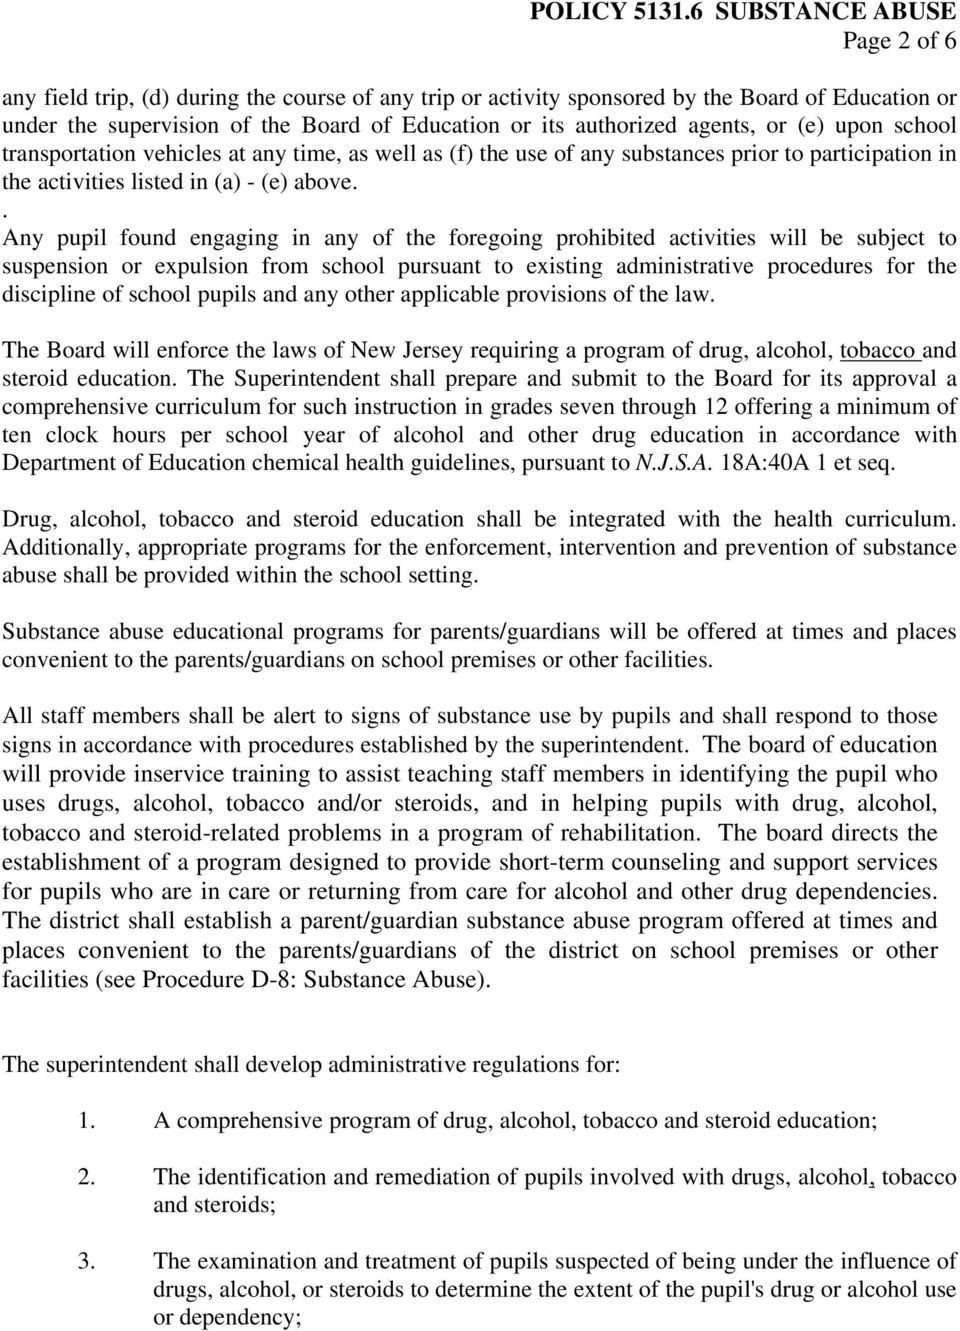 . Any pupil found engaging in any of the foregoing prohibited activities will be subject to suspension or expulsion from school pursuant to existing administrative procedures for the discipline of